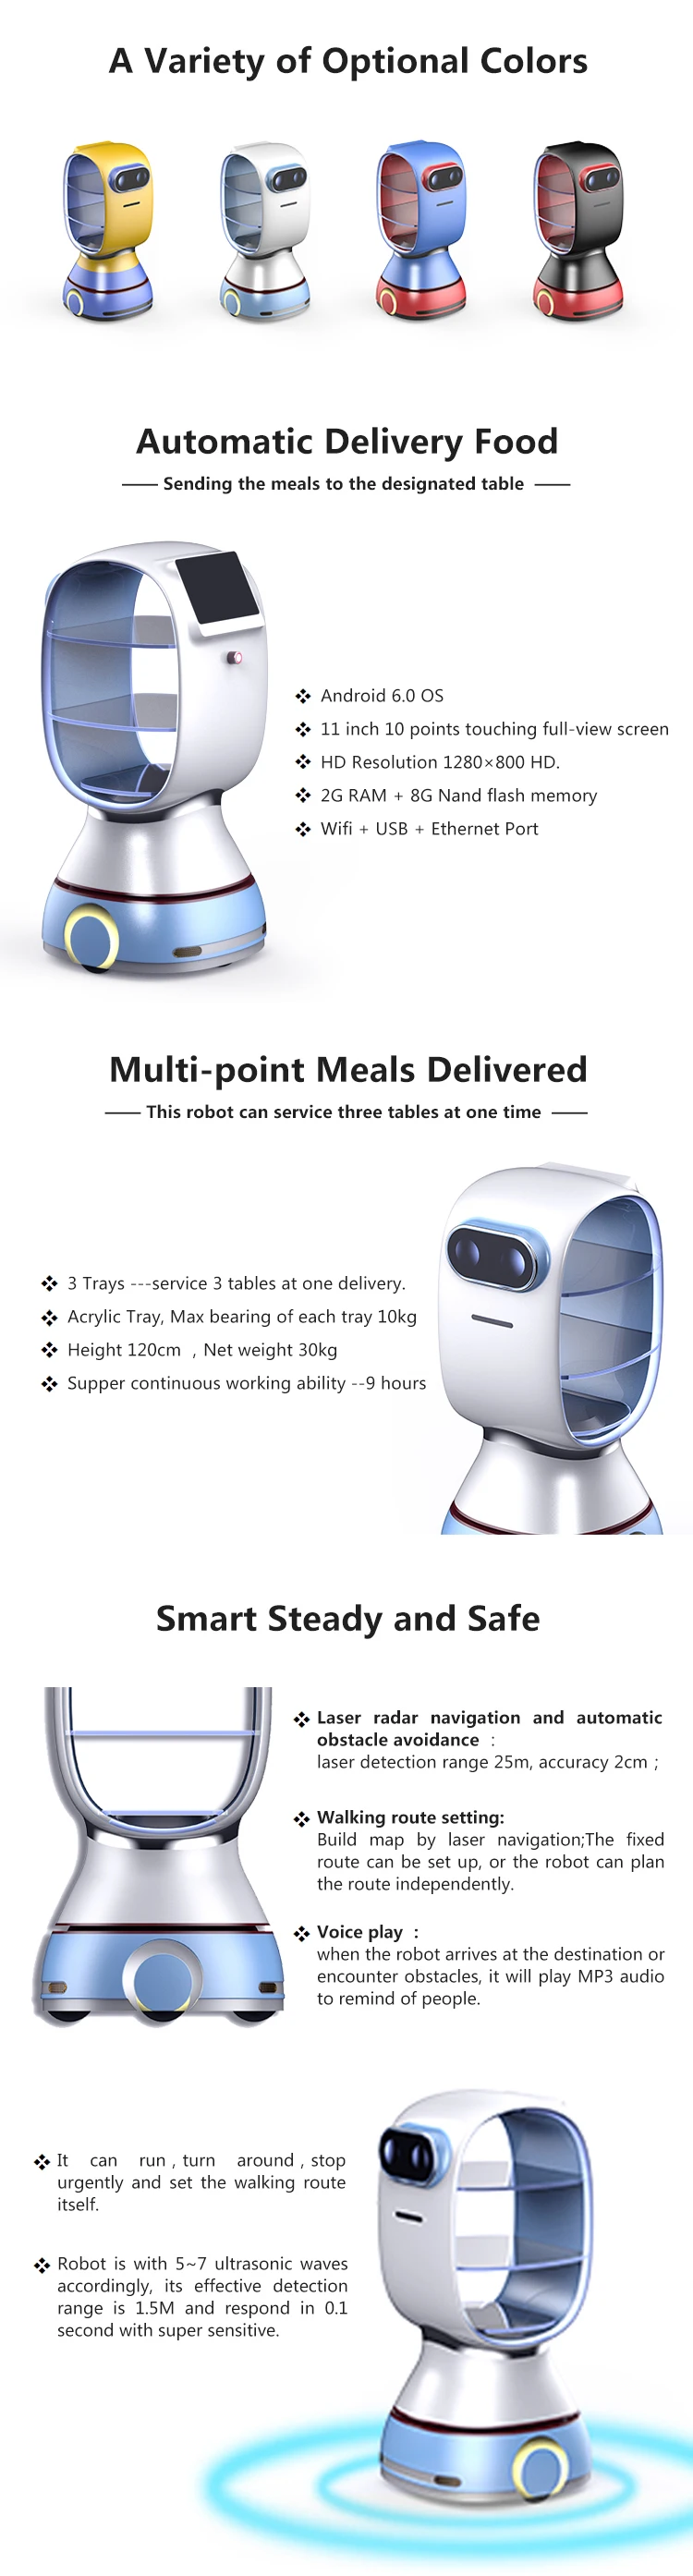 Hot Selling Intelligent Humanoid Smart Automatic Robot Mesero Food Delivery Cafe Robot Waiter For Sale Buy Robot Food Delivery Robot Mesero Robot Waiter For Sale Cafe Robot Product On Alibaba Com